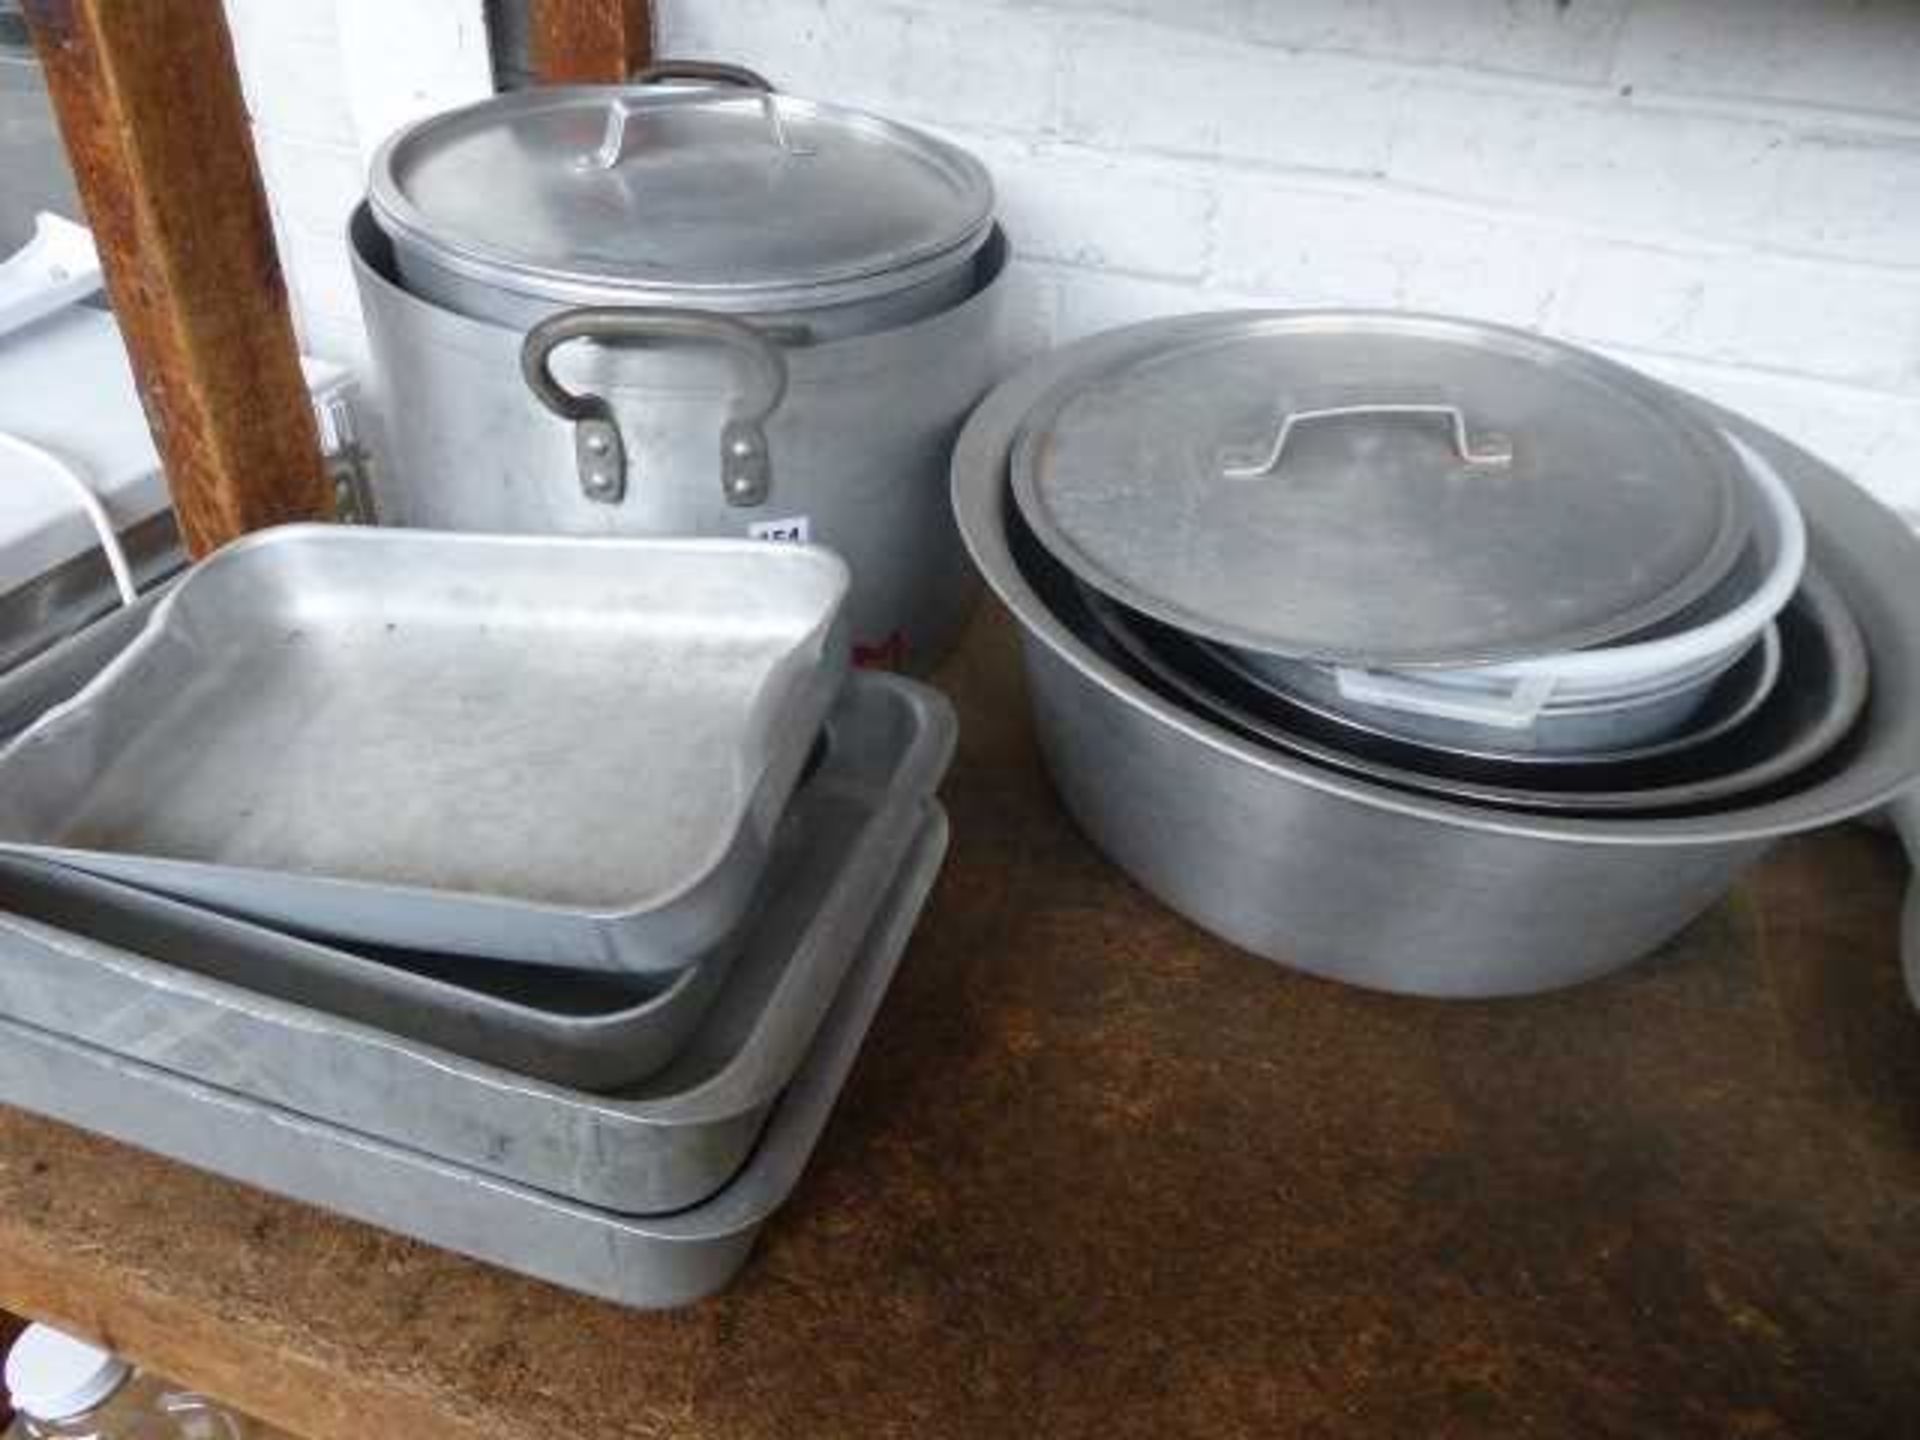 Aluminium cooking pots and pans (some with lids), mixing bowls and baking trays